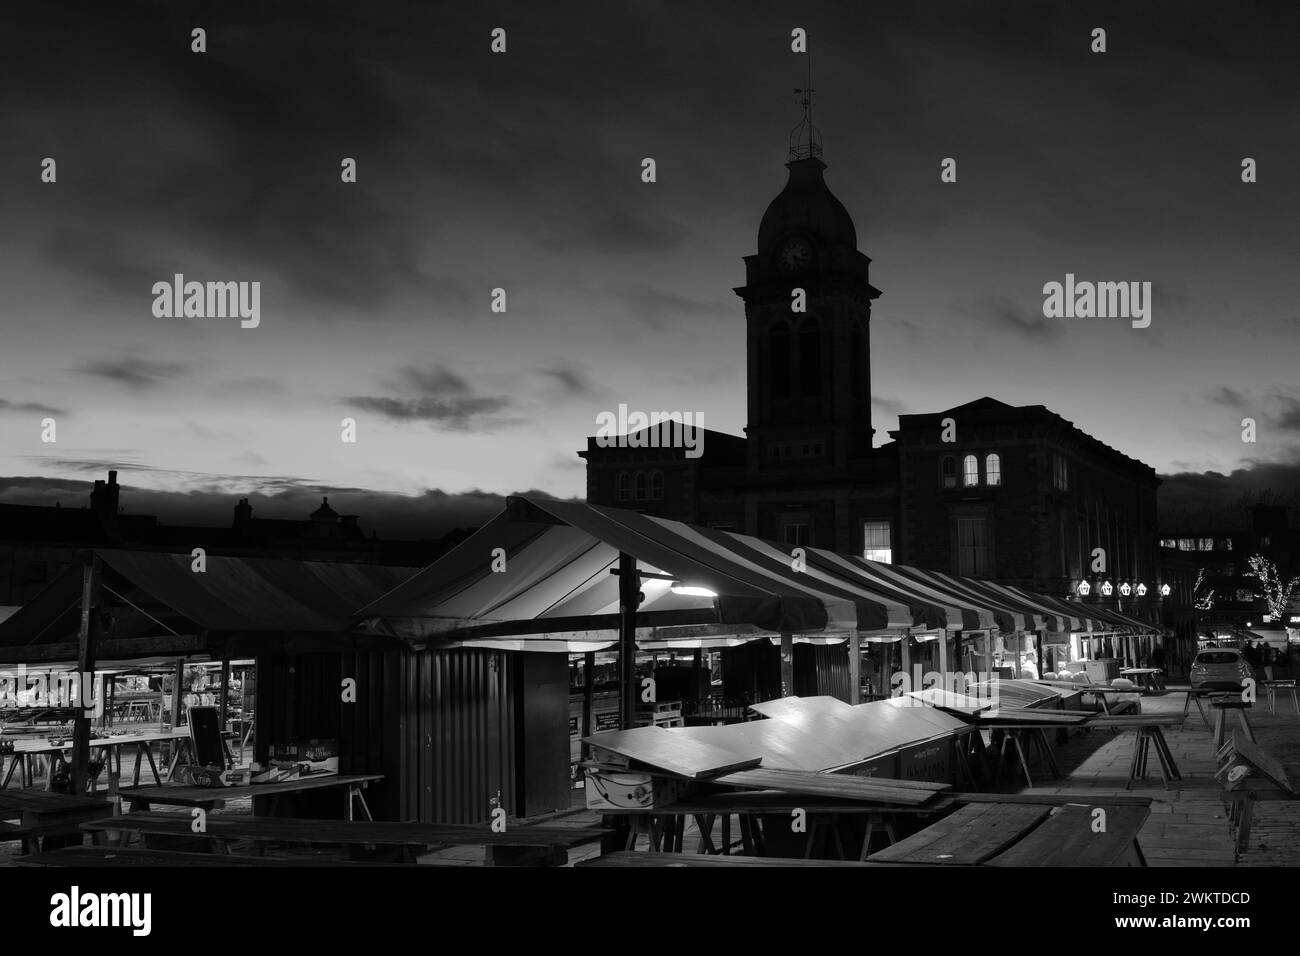 Dusk, the Market Hall, Chesterfield town, Derbyshire, England, UK Stock Photo